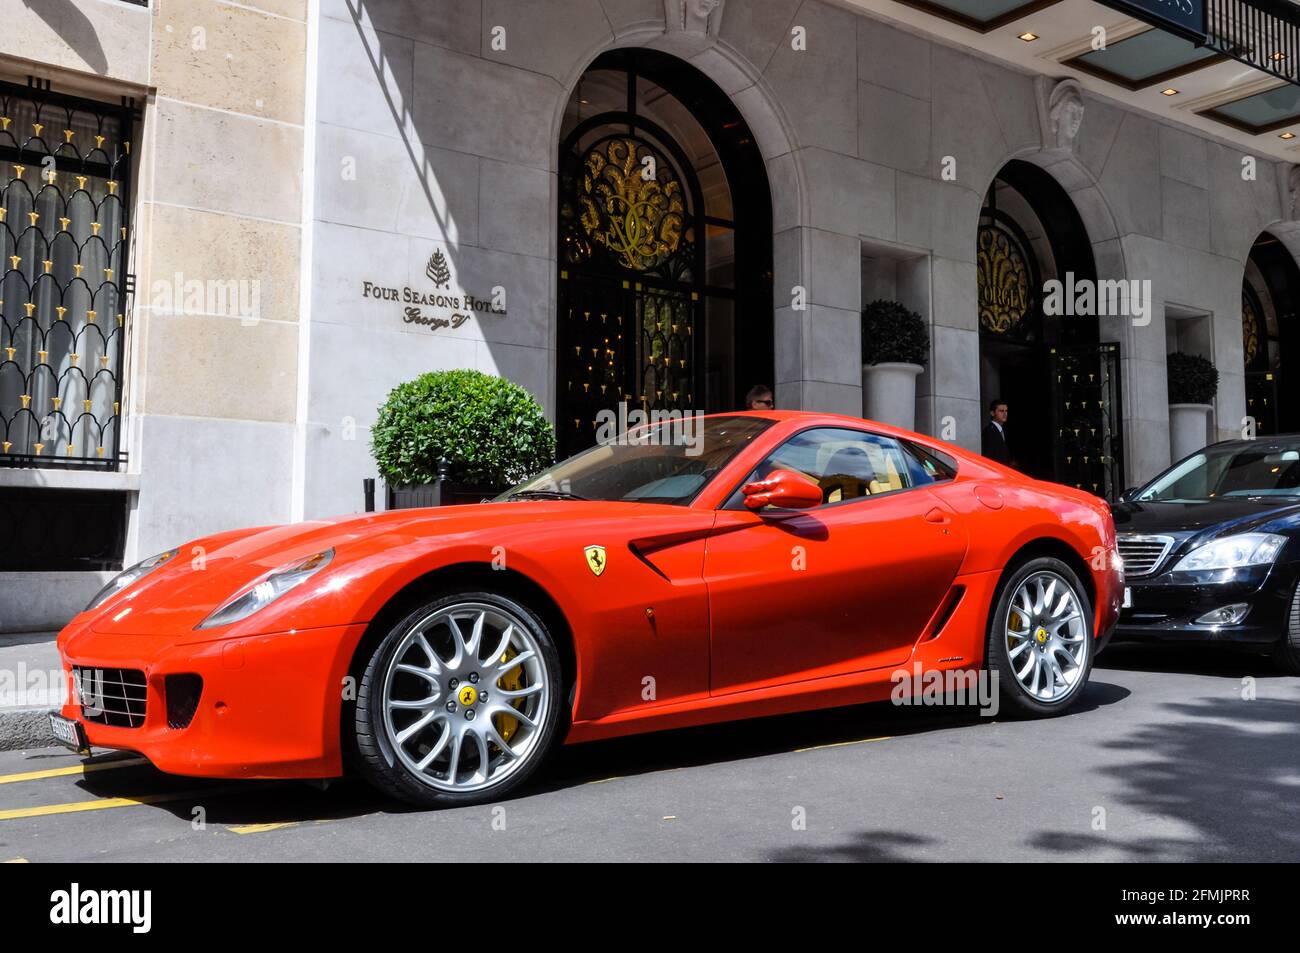 PARIS, FRANCE - CIRCA JULY 2009: A Ferrari 599 GTB Fiorano parked in front of the George V Hotel in Paris Stock Photo